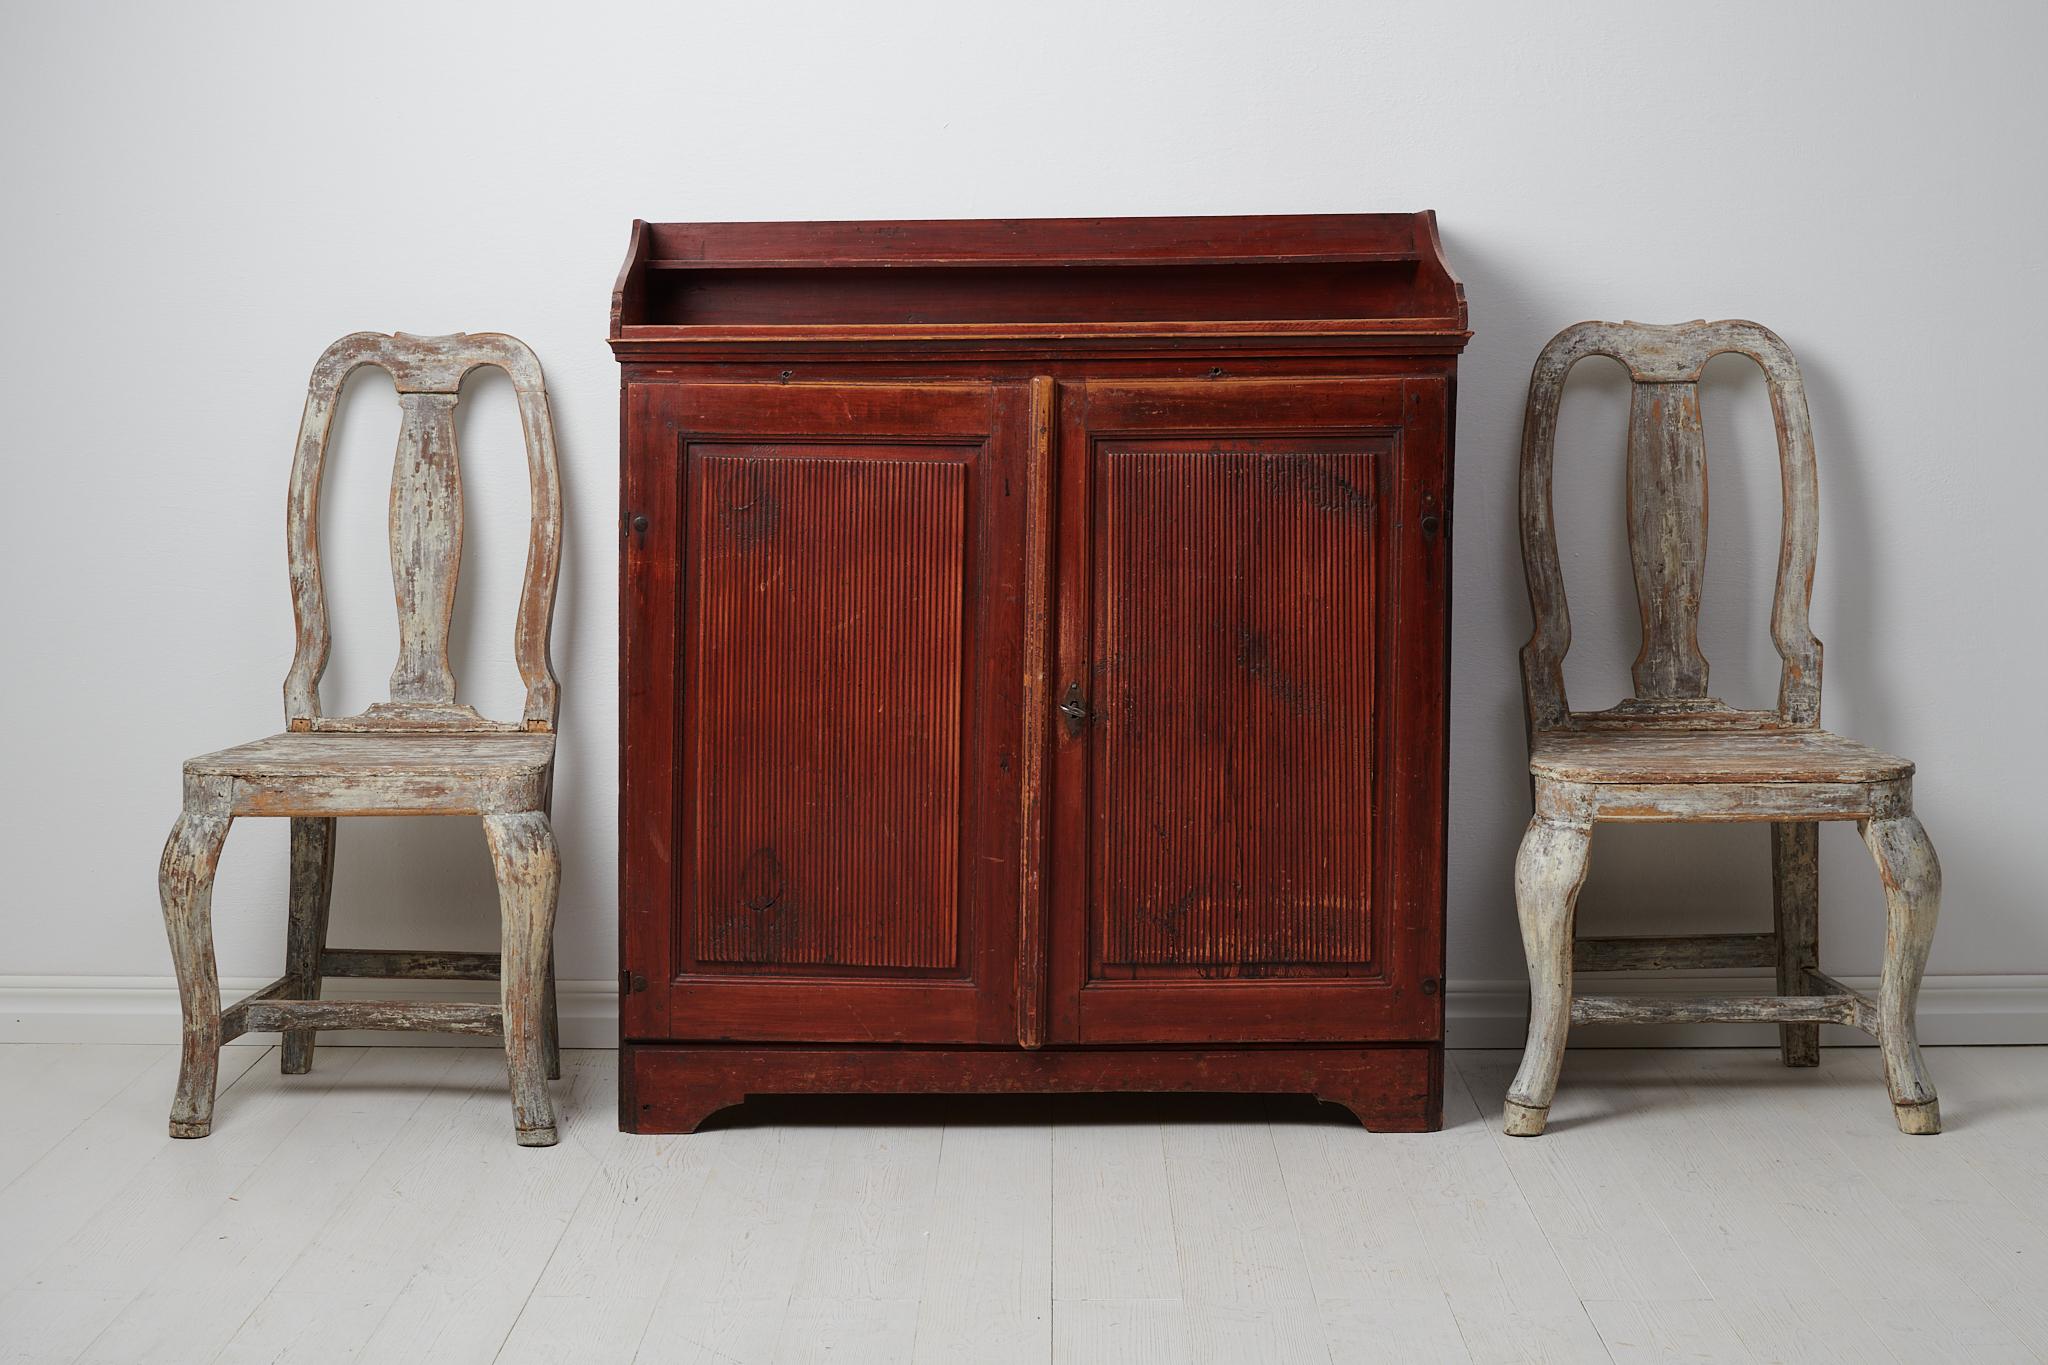 Antique Swedish country sideboard in gustavian style made around 1810 in Dalarna Sweden. The sideboard is a genuine country house furniture hand-made in pine. The doors have a ribbed decor and they open to an interior with shelves and drawers at the